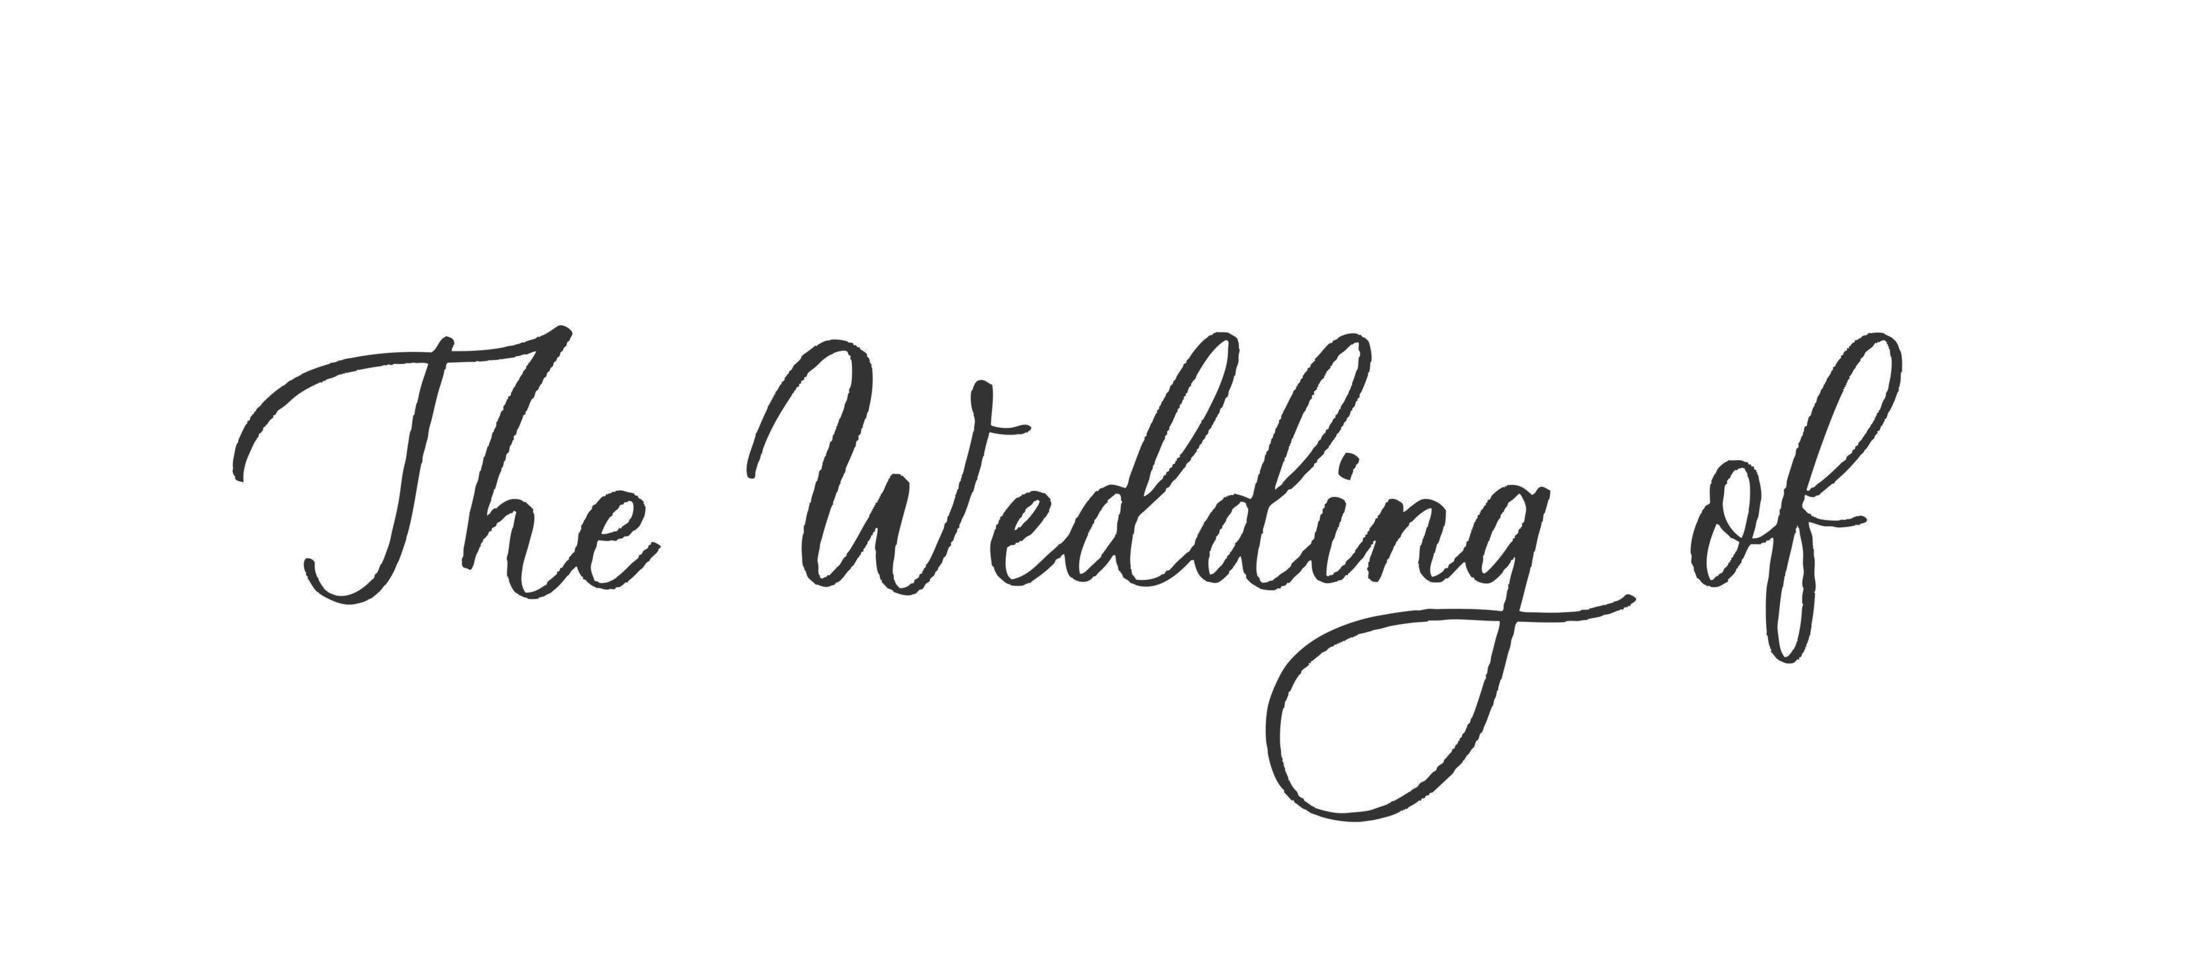 The wedding off - wedding calligraphic inscription with smooth lines. vector